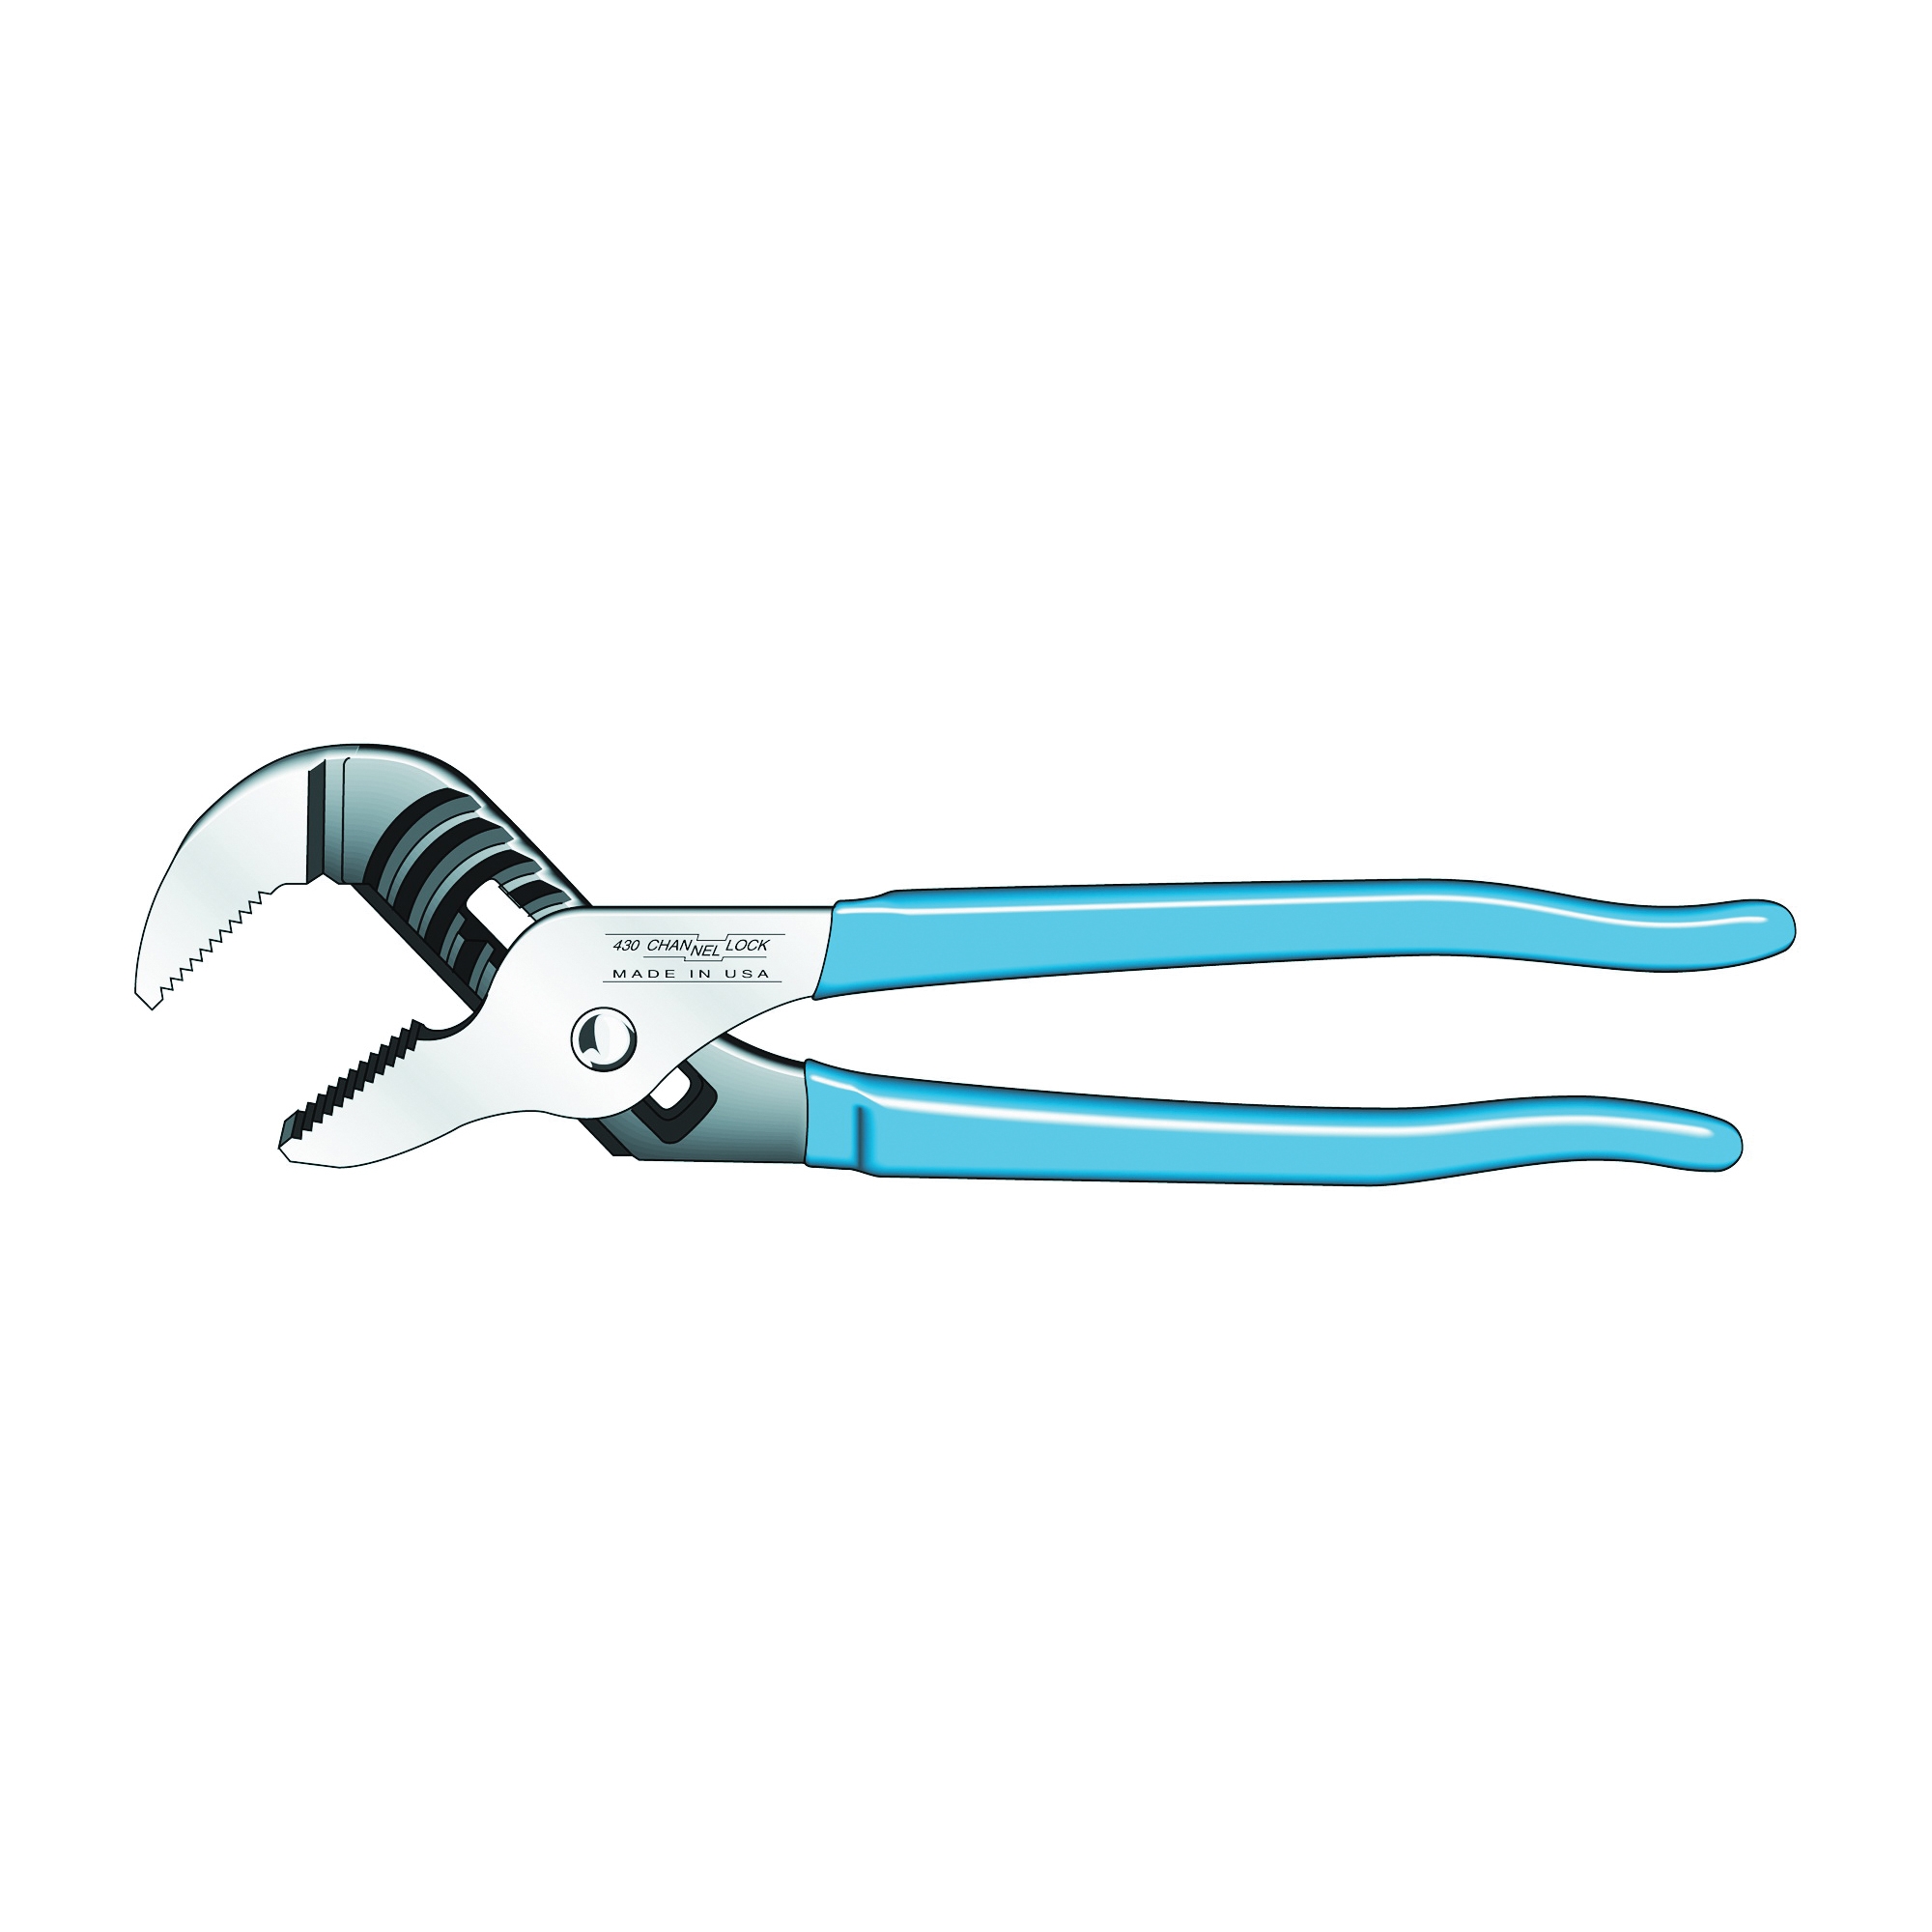 Channellock 480 BigAzz Tongue & Groove Pliers